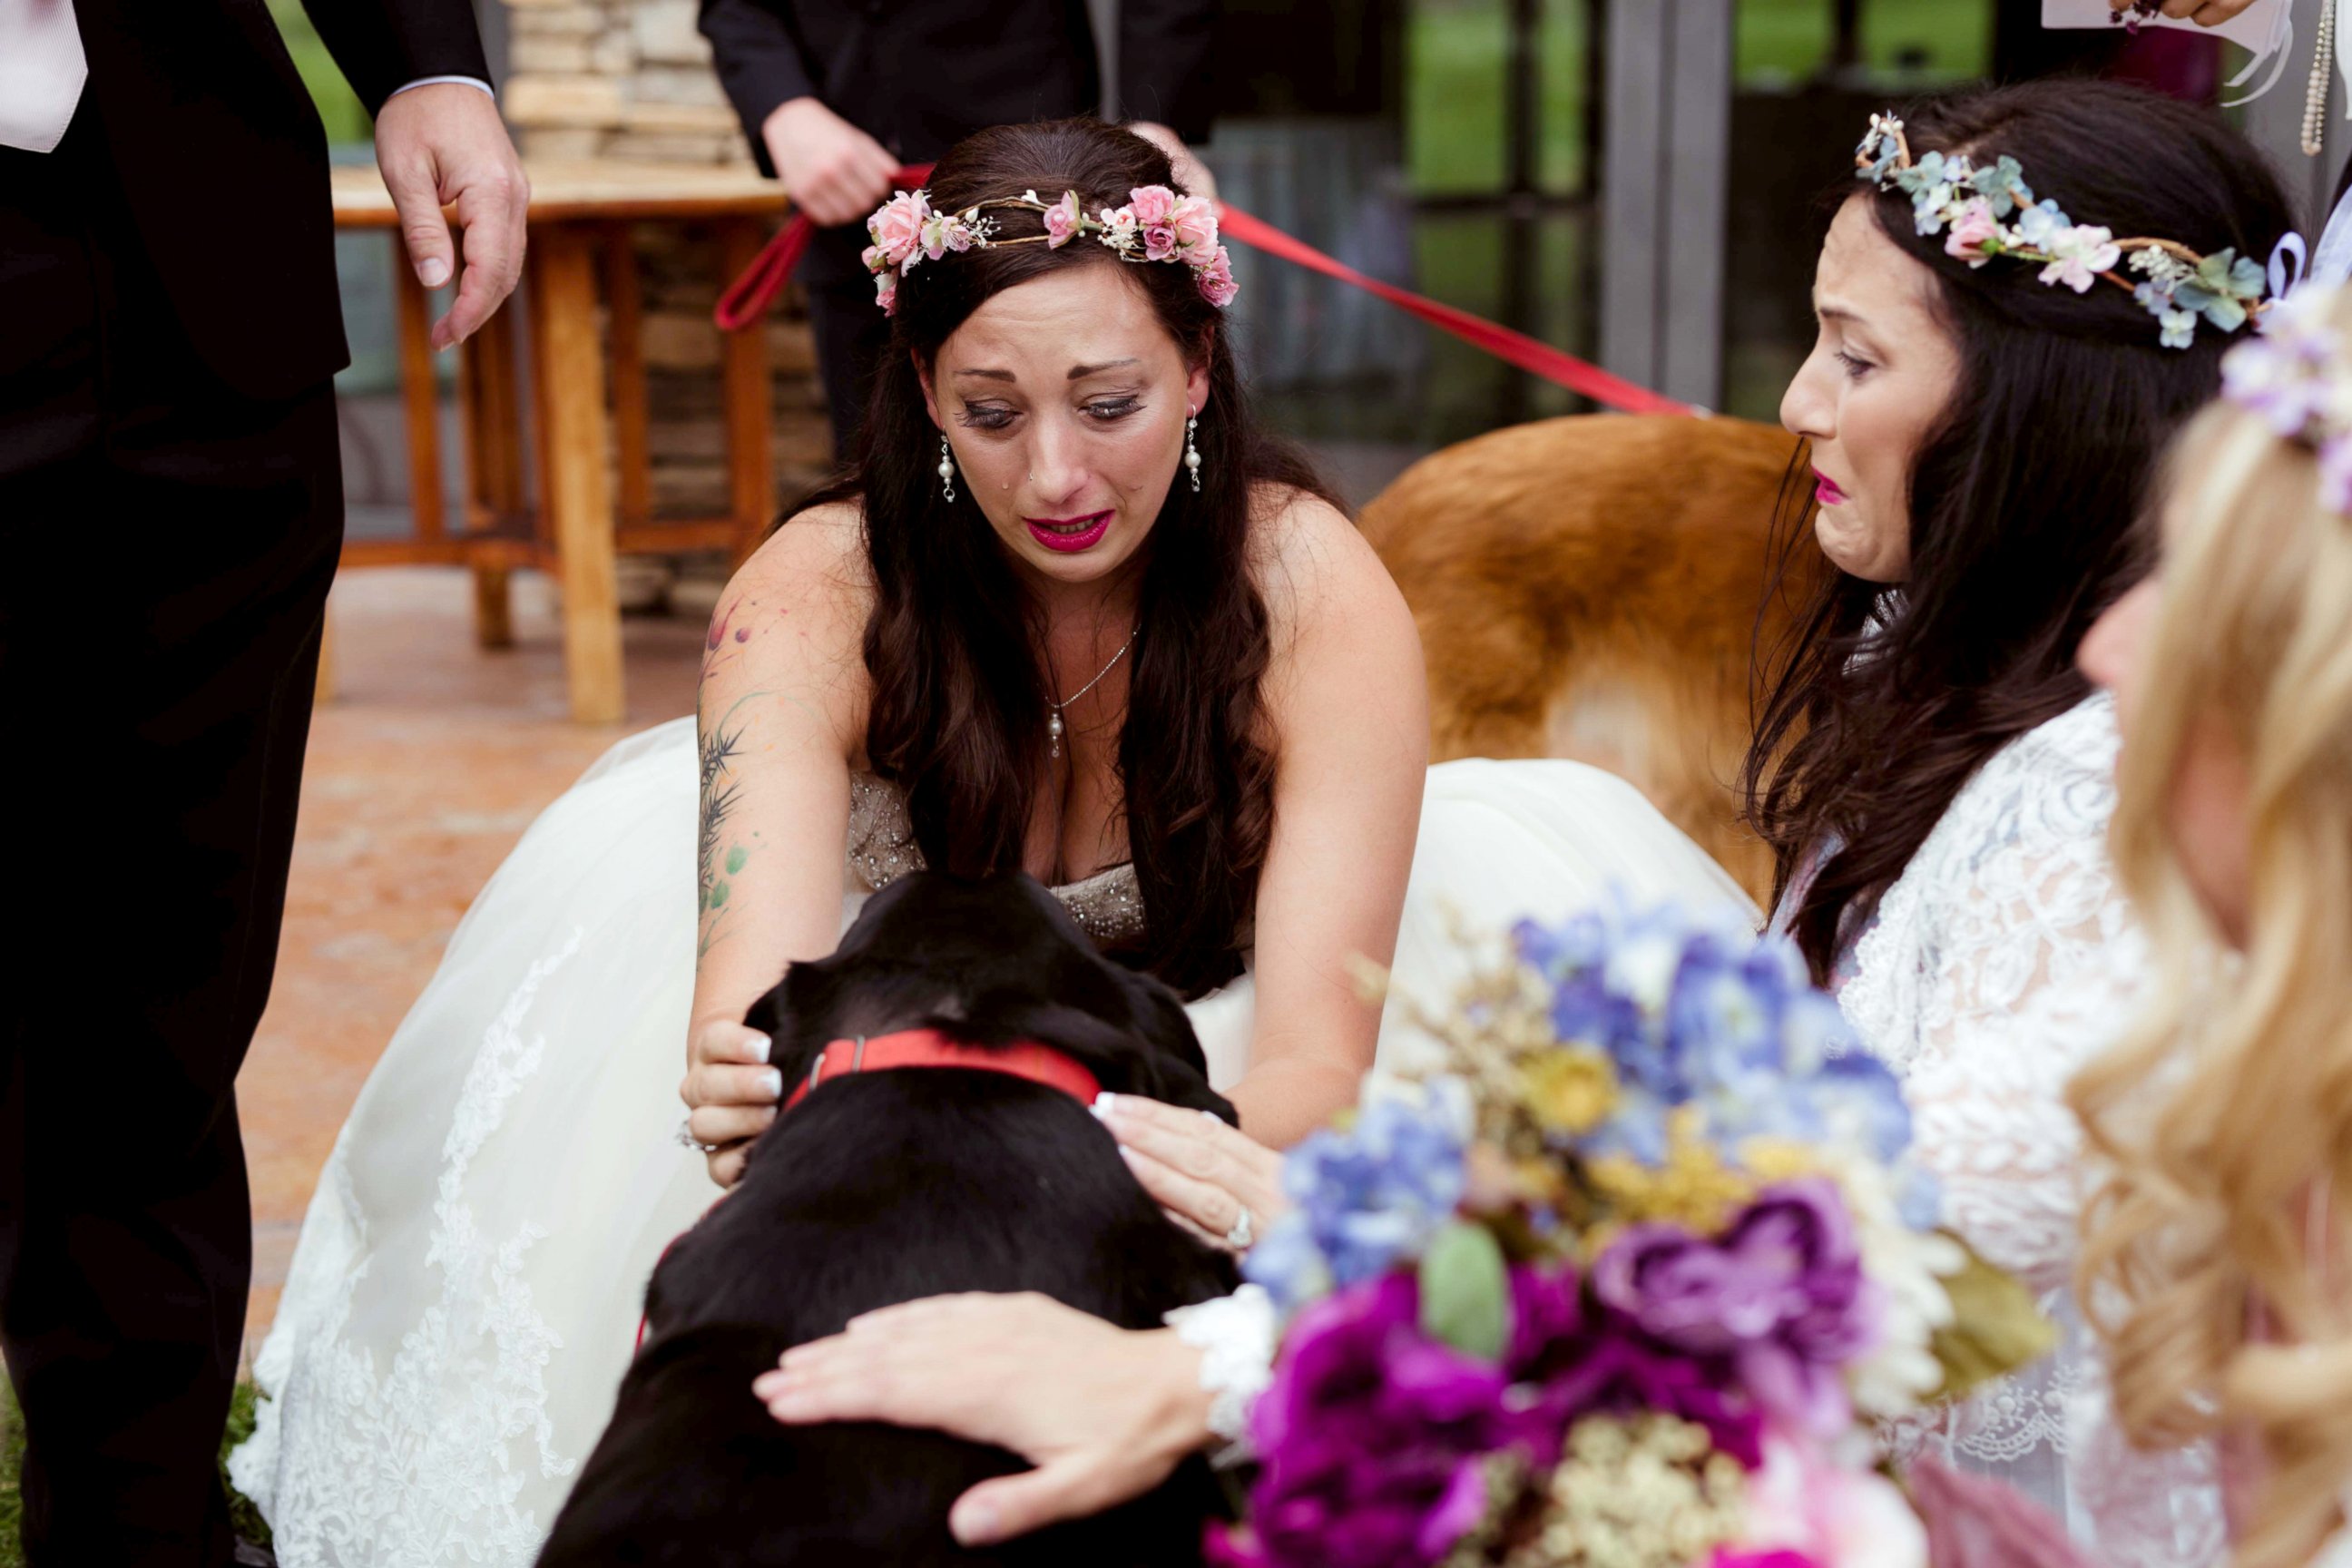 PHOTO: On Sept. 1, maid of honor Katie Lloyd carried Charlie Bear, 15, her sister's dying dog, down the aisle during her wedding in Buena Vista, Colorado. 